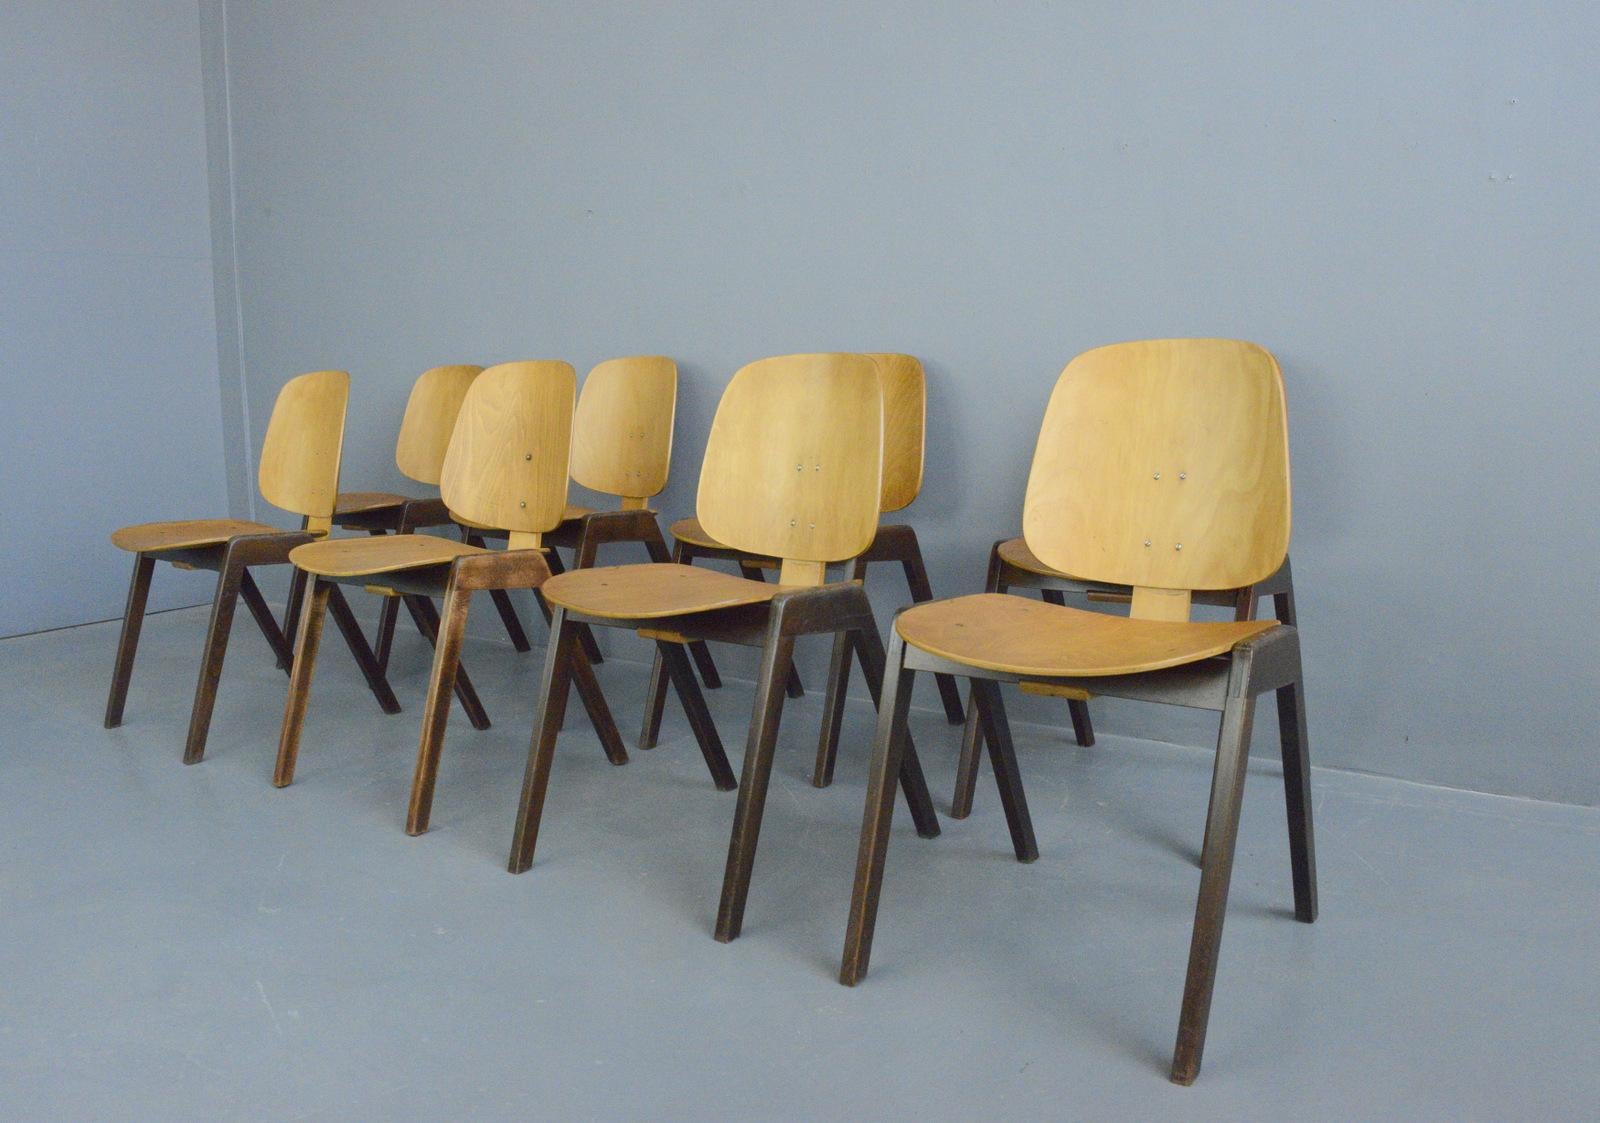 American Midcentury Chairs by Joe Atkinson for Thonet, circa 1950s